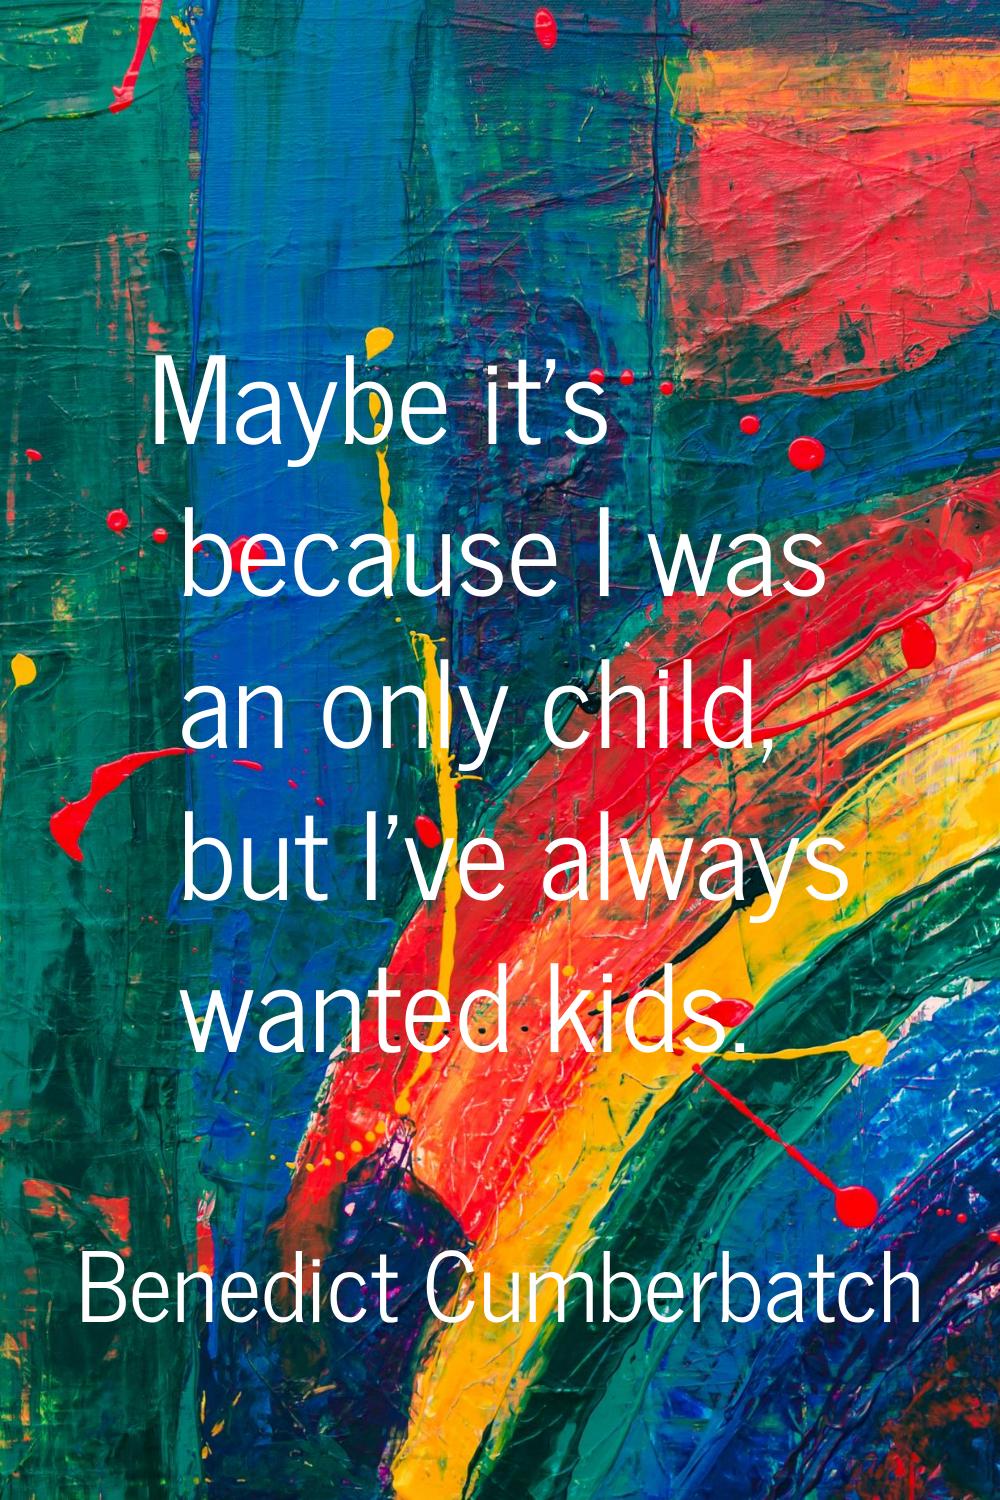 Maybe it's because I was an only child, but I've always wanted kids.